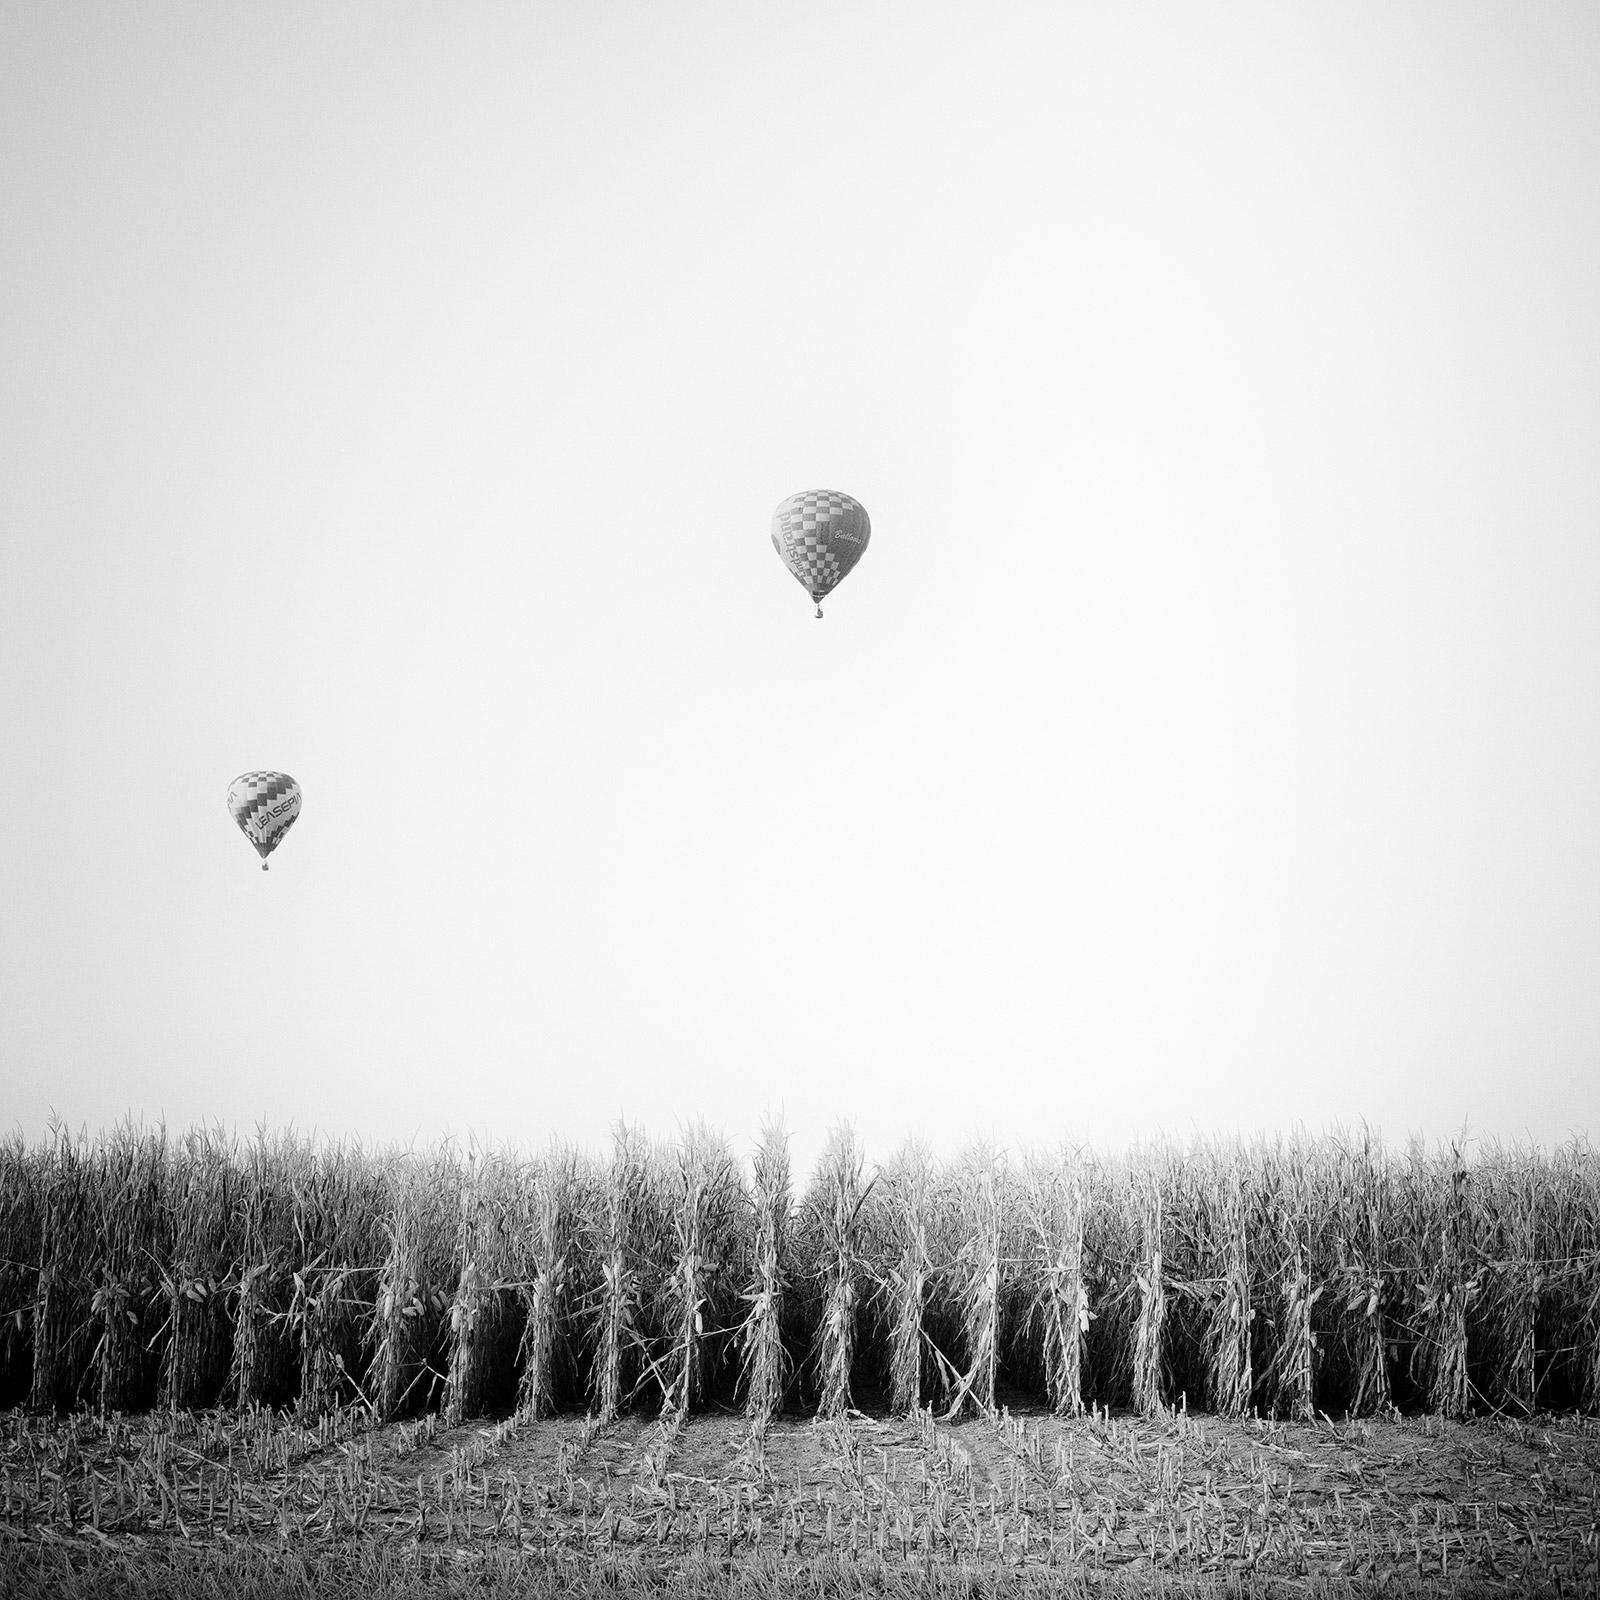 Gerald Berghammer Black and White Photograph - Hot Air Balloon, Cornfield, Championship, black and white landscape photo print